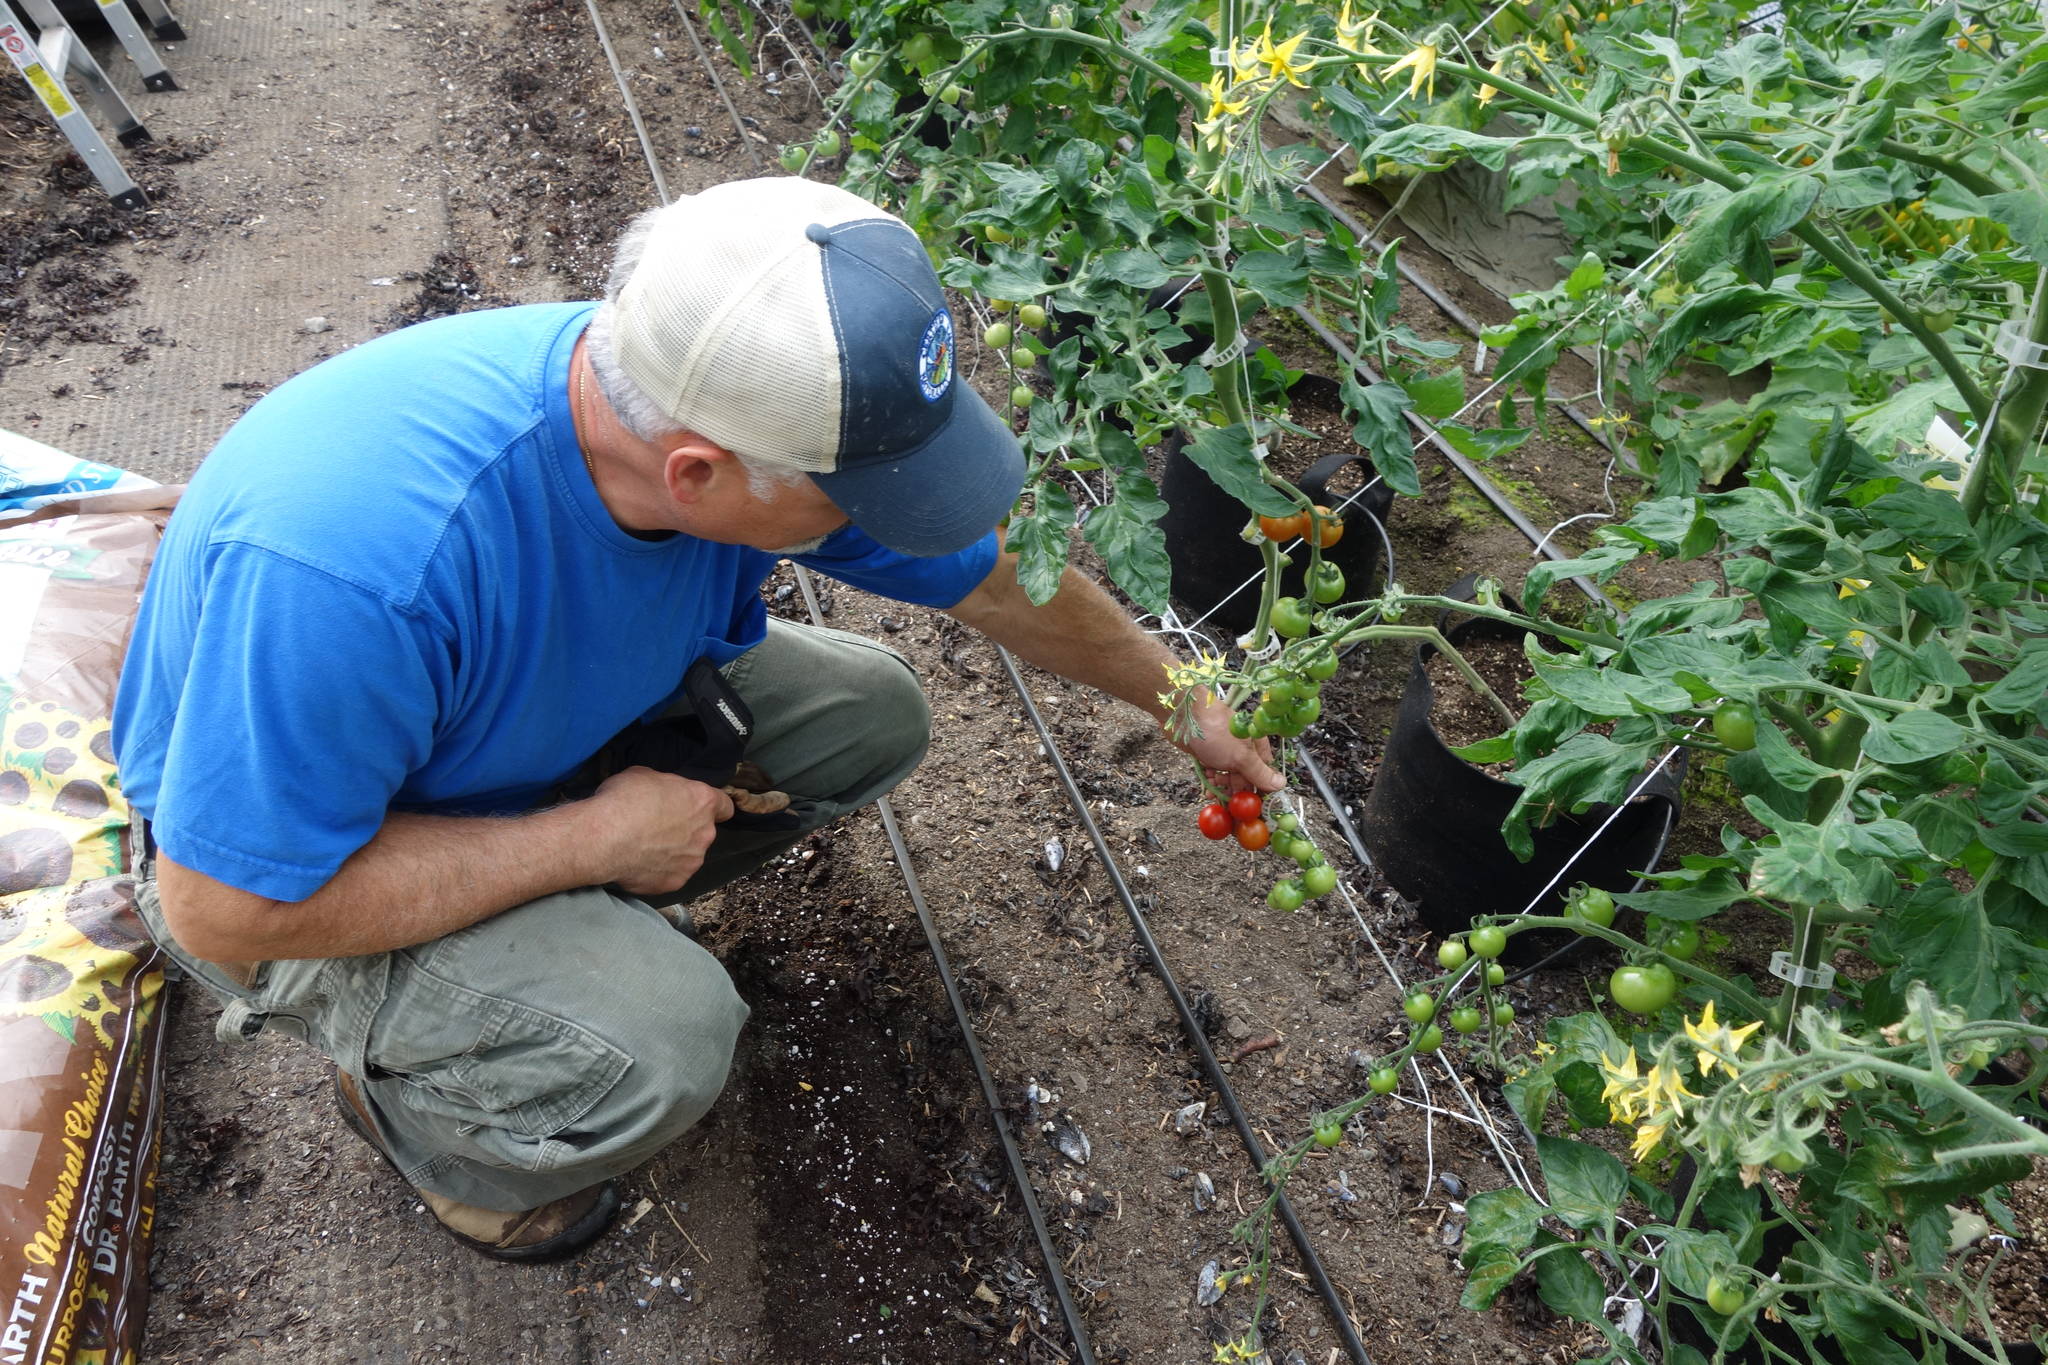 Joe Orsi shows tomatoes growing in his greenhouse. Photo by Clara Miller.